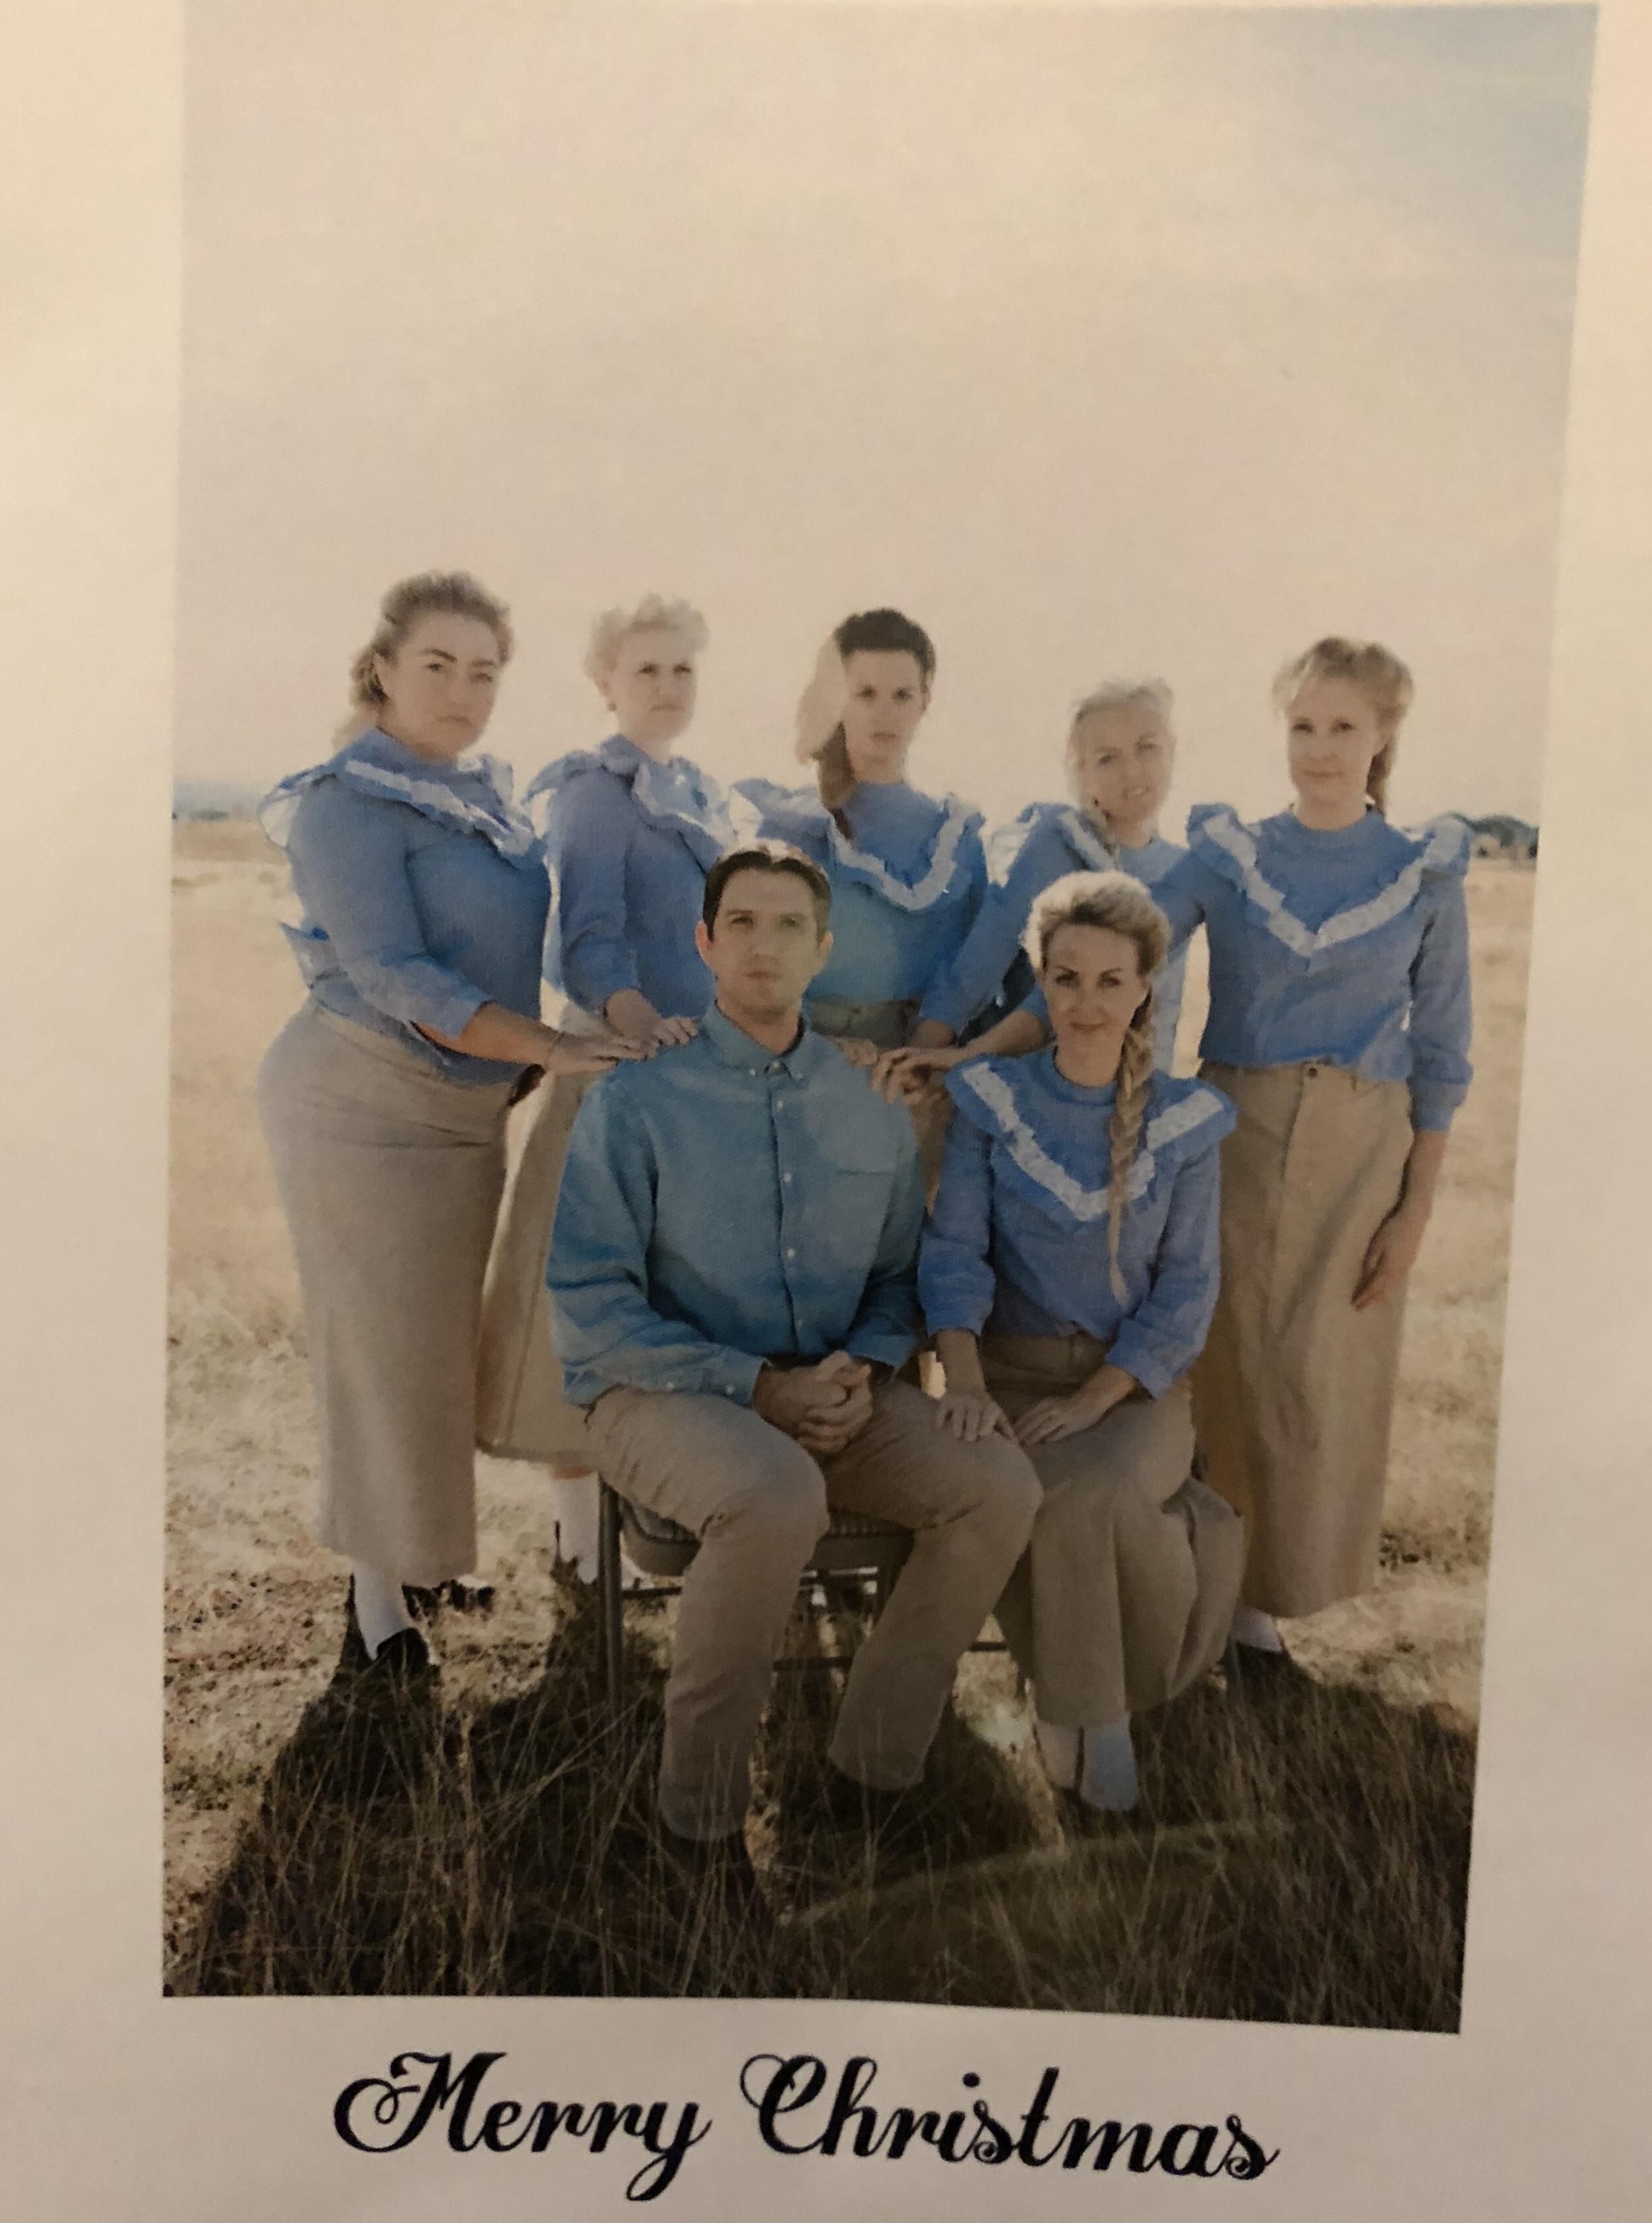 My Mormon co-worker finds it funny when people ask if he has multiple wives . So for his Christmas card this year, he decided to commit to the bit to freak people out.